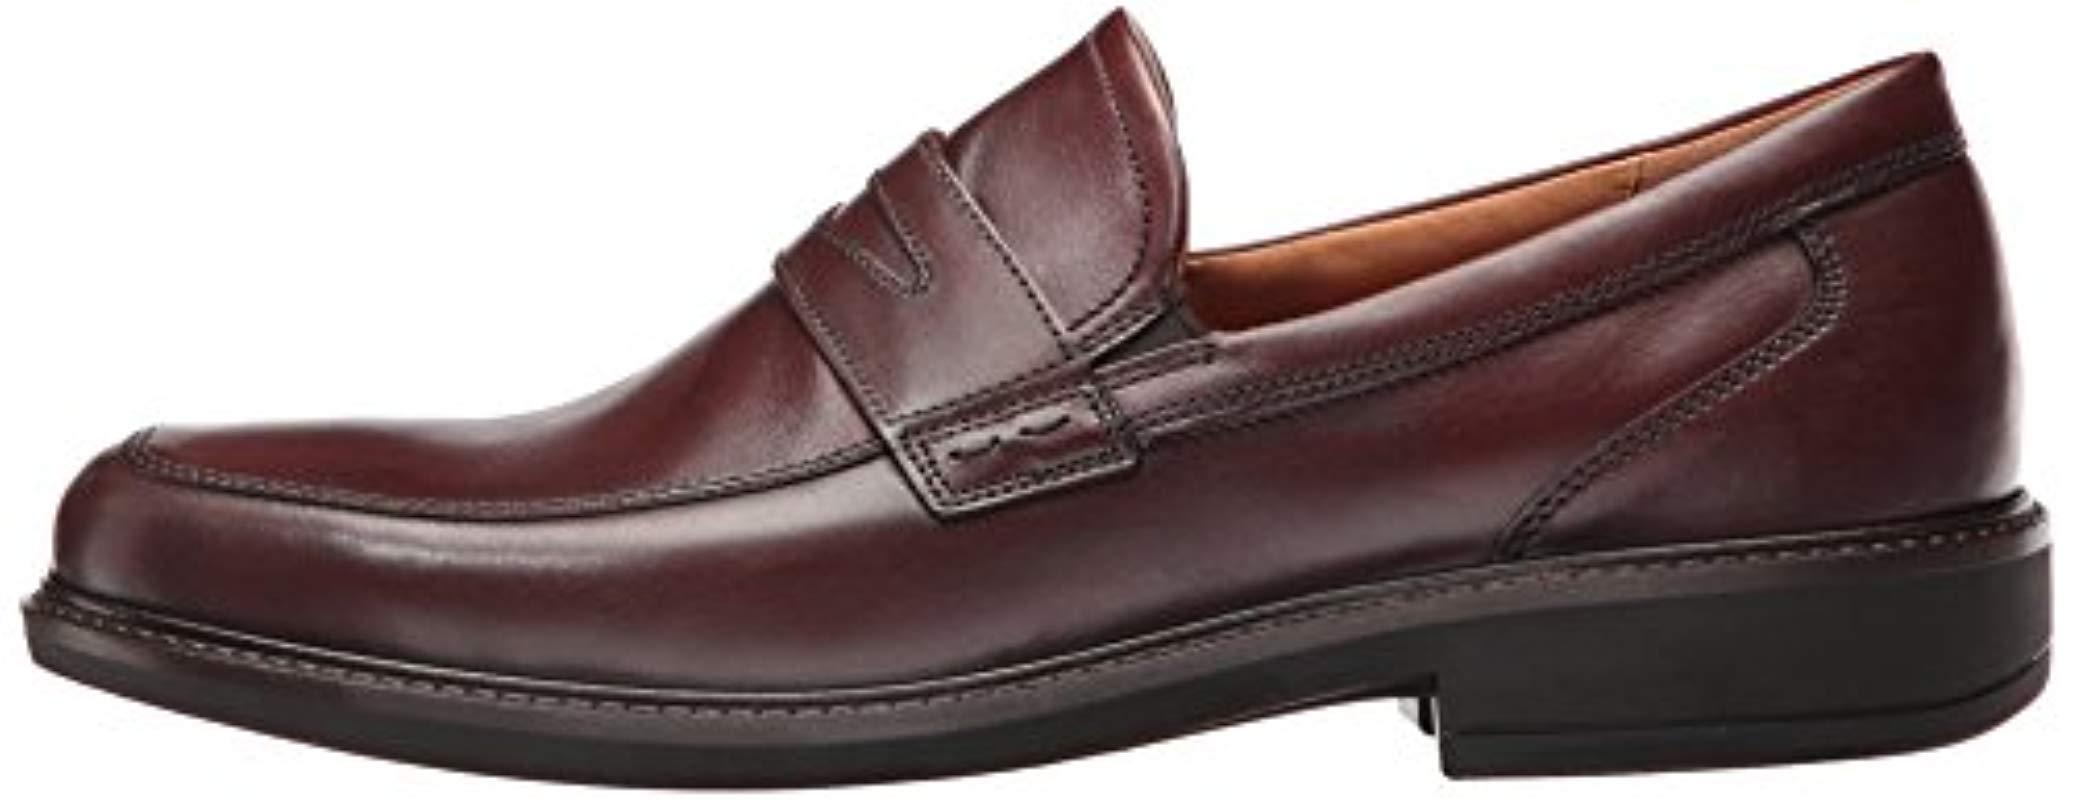 ecco holton penny loafer